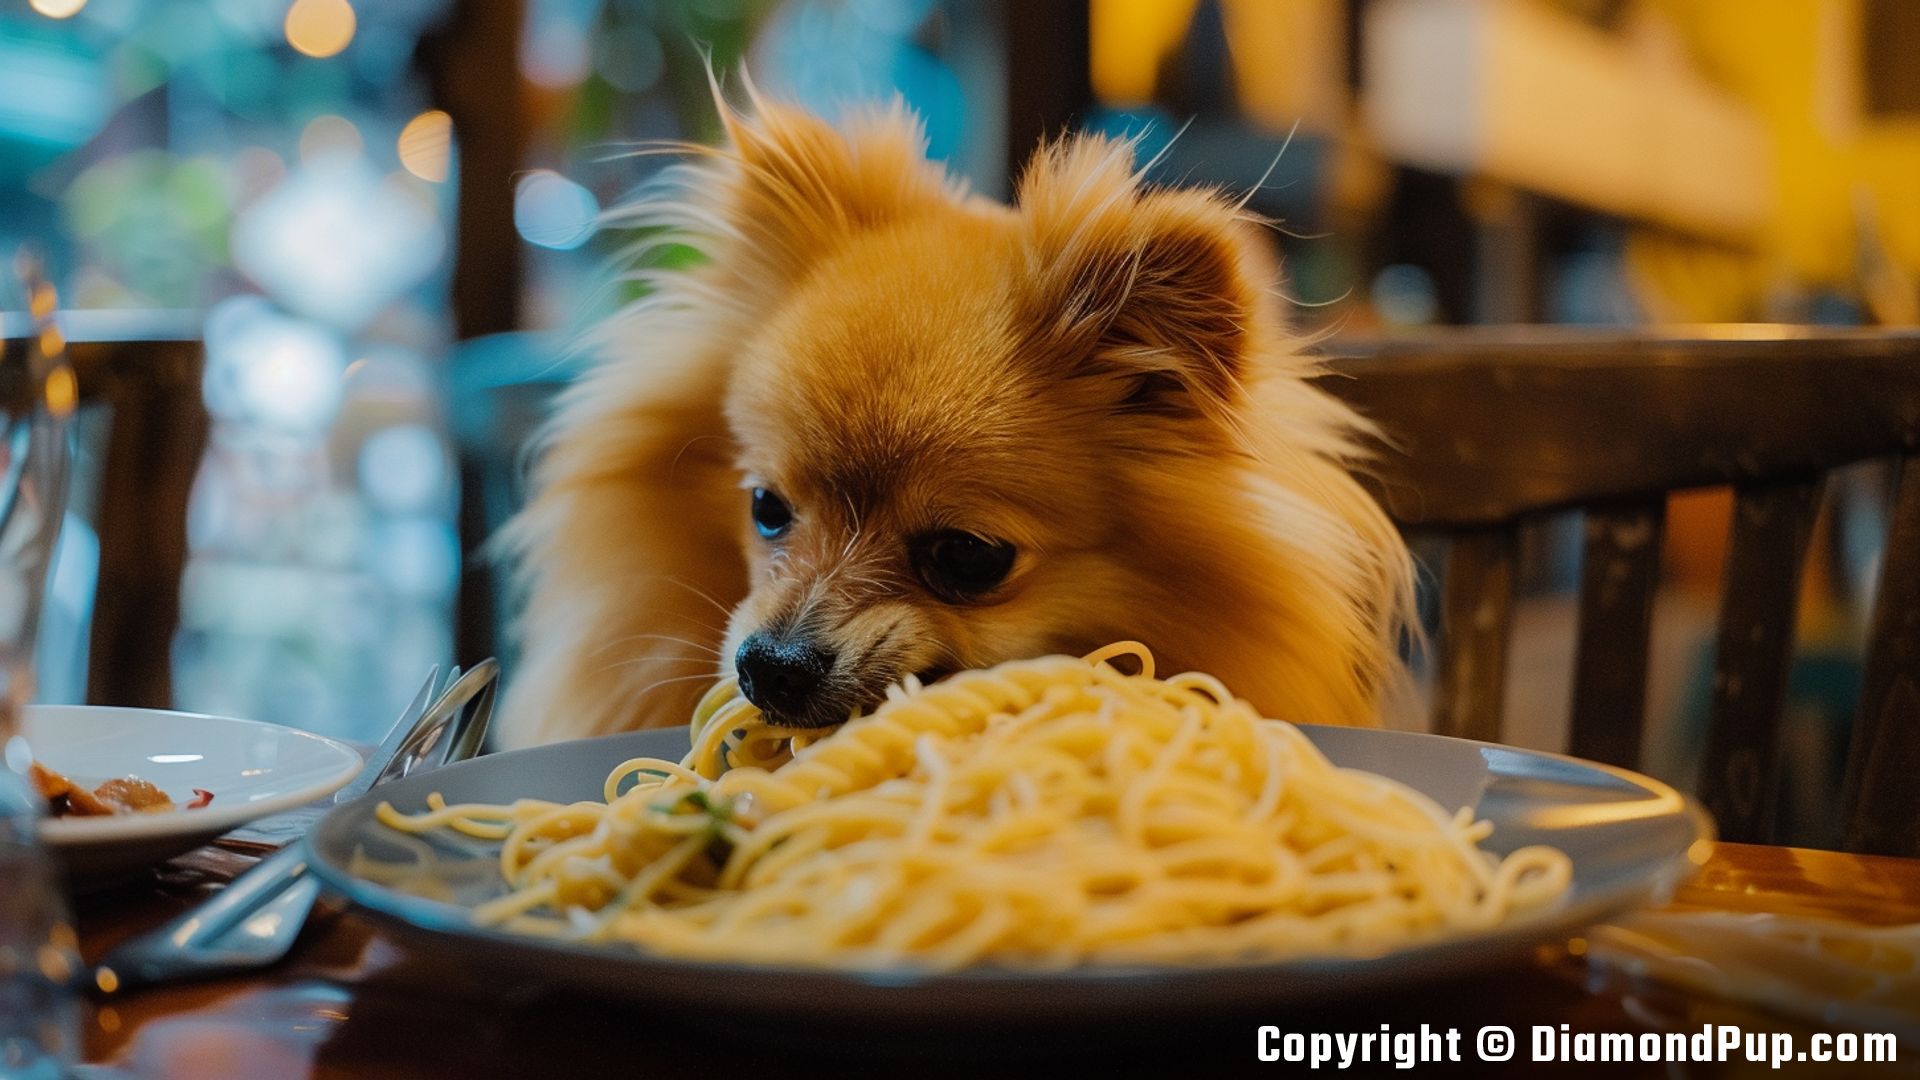 Photo of a Cute Pomeranian Snacking on Pasta